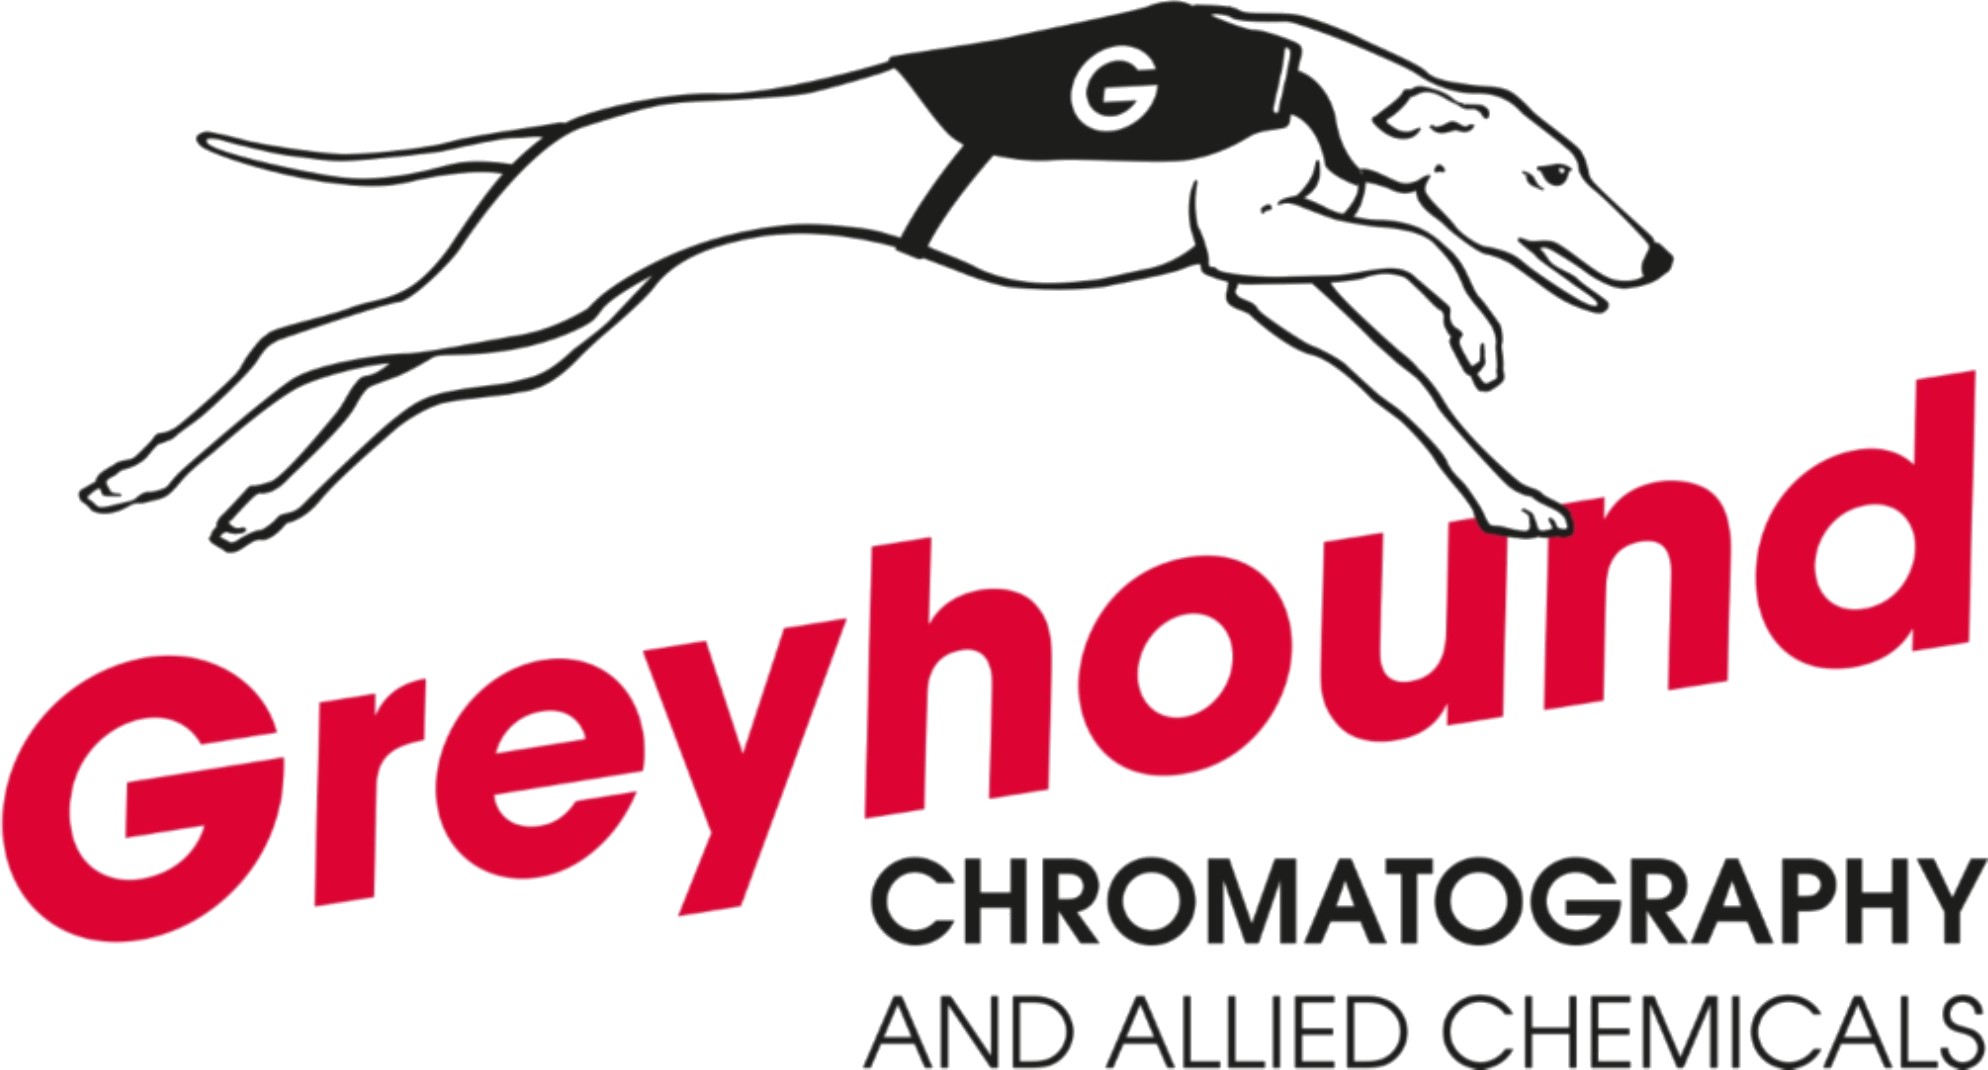 Greyhound Chromatography and Allied Chemicals